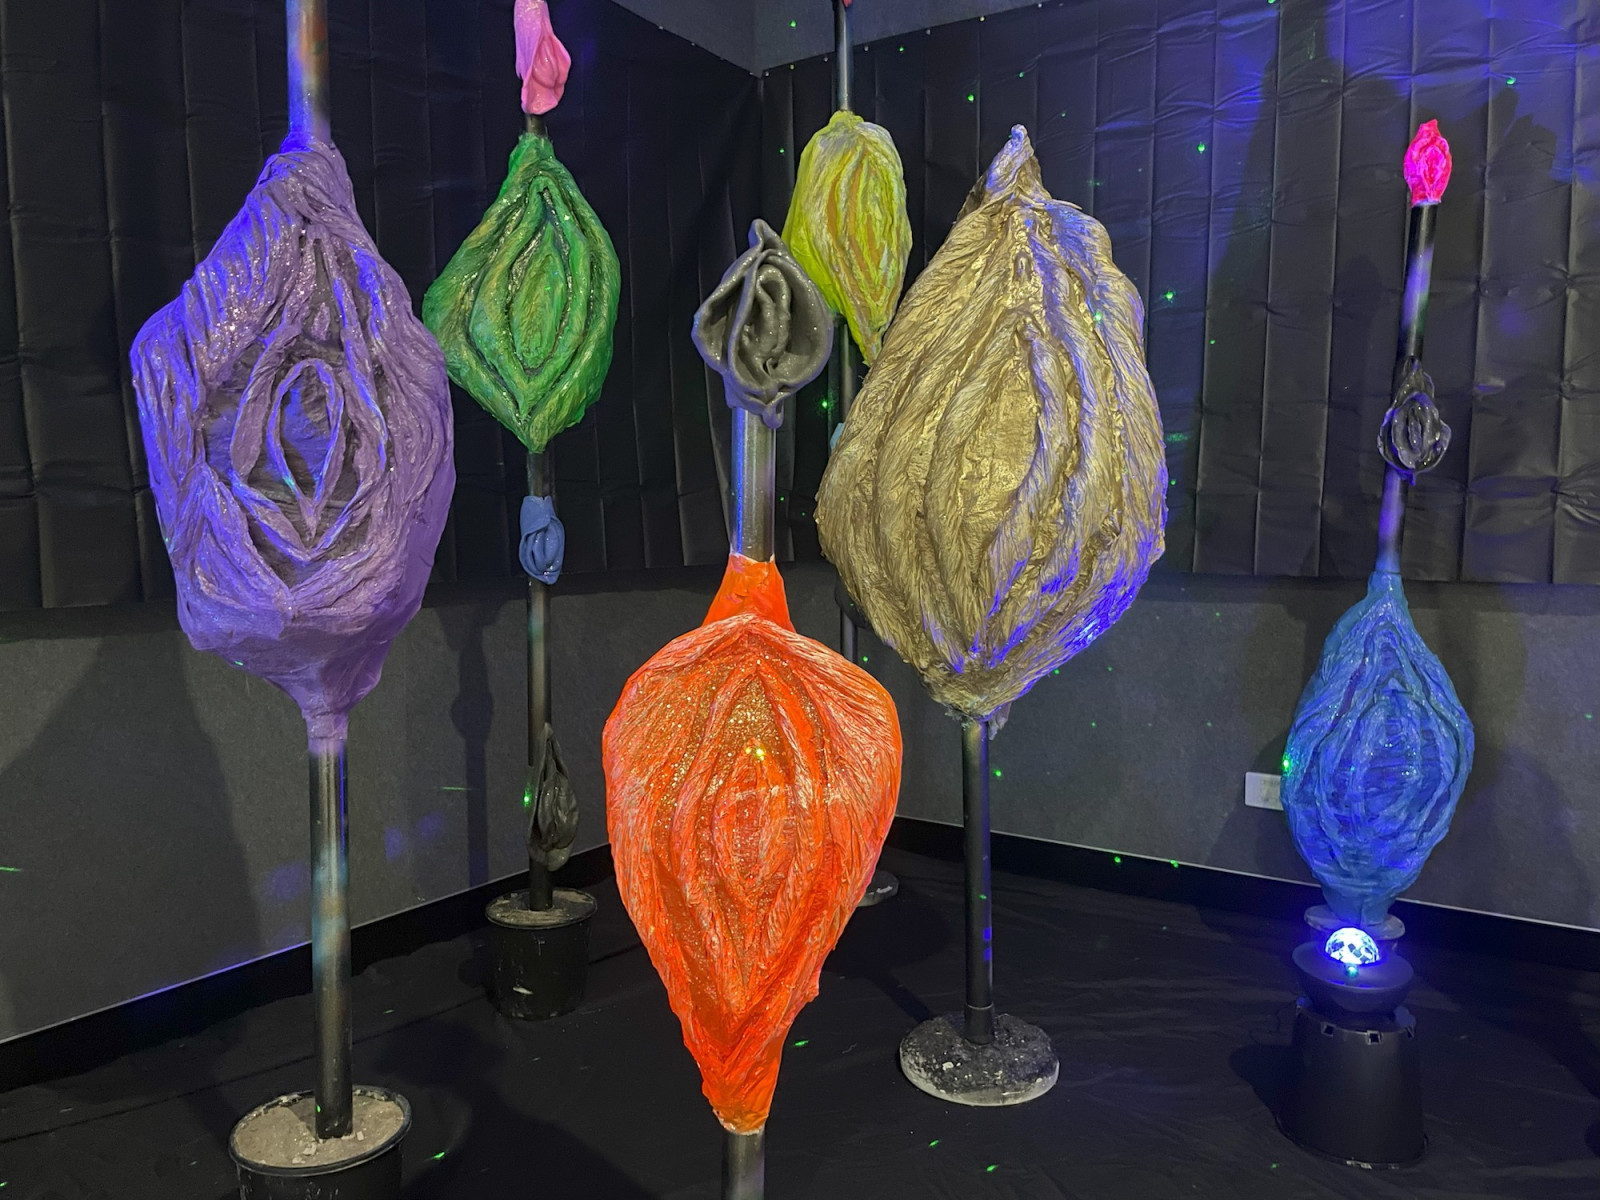 Large, galaxy-lit sculptures of colourful vaginas are mounted on poles in the corner of a darkened room.